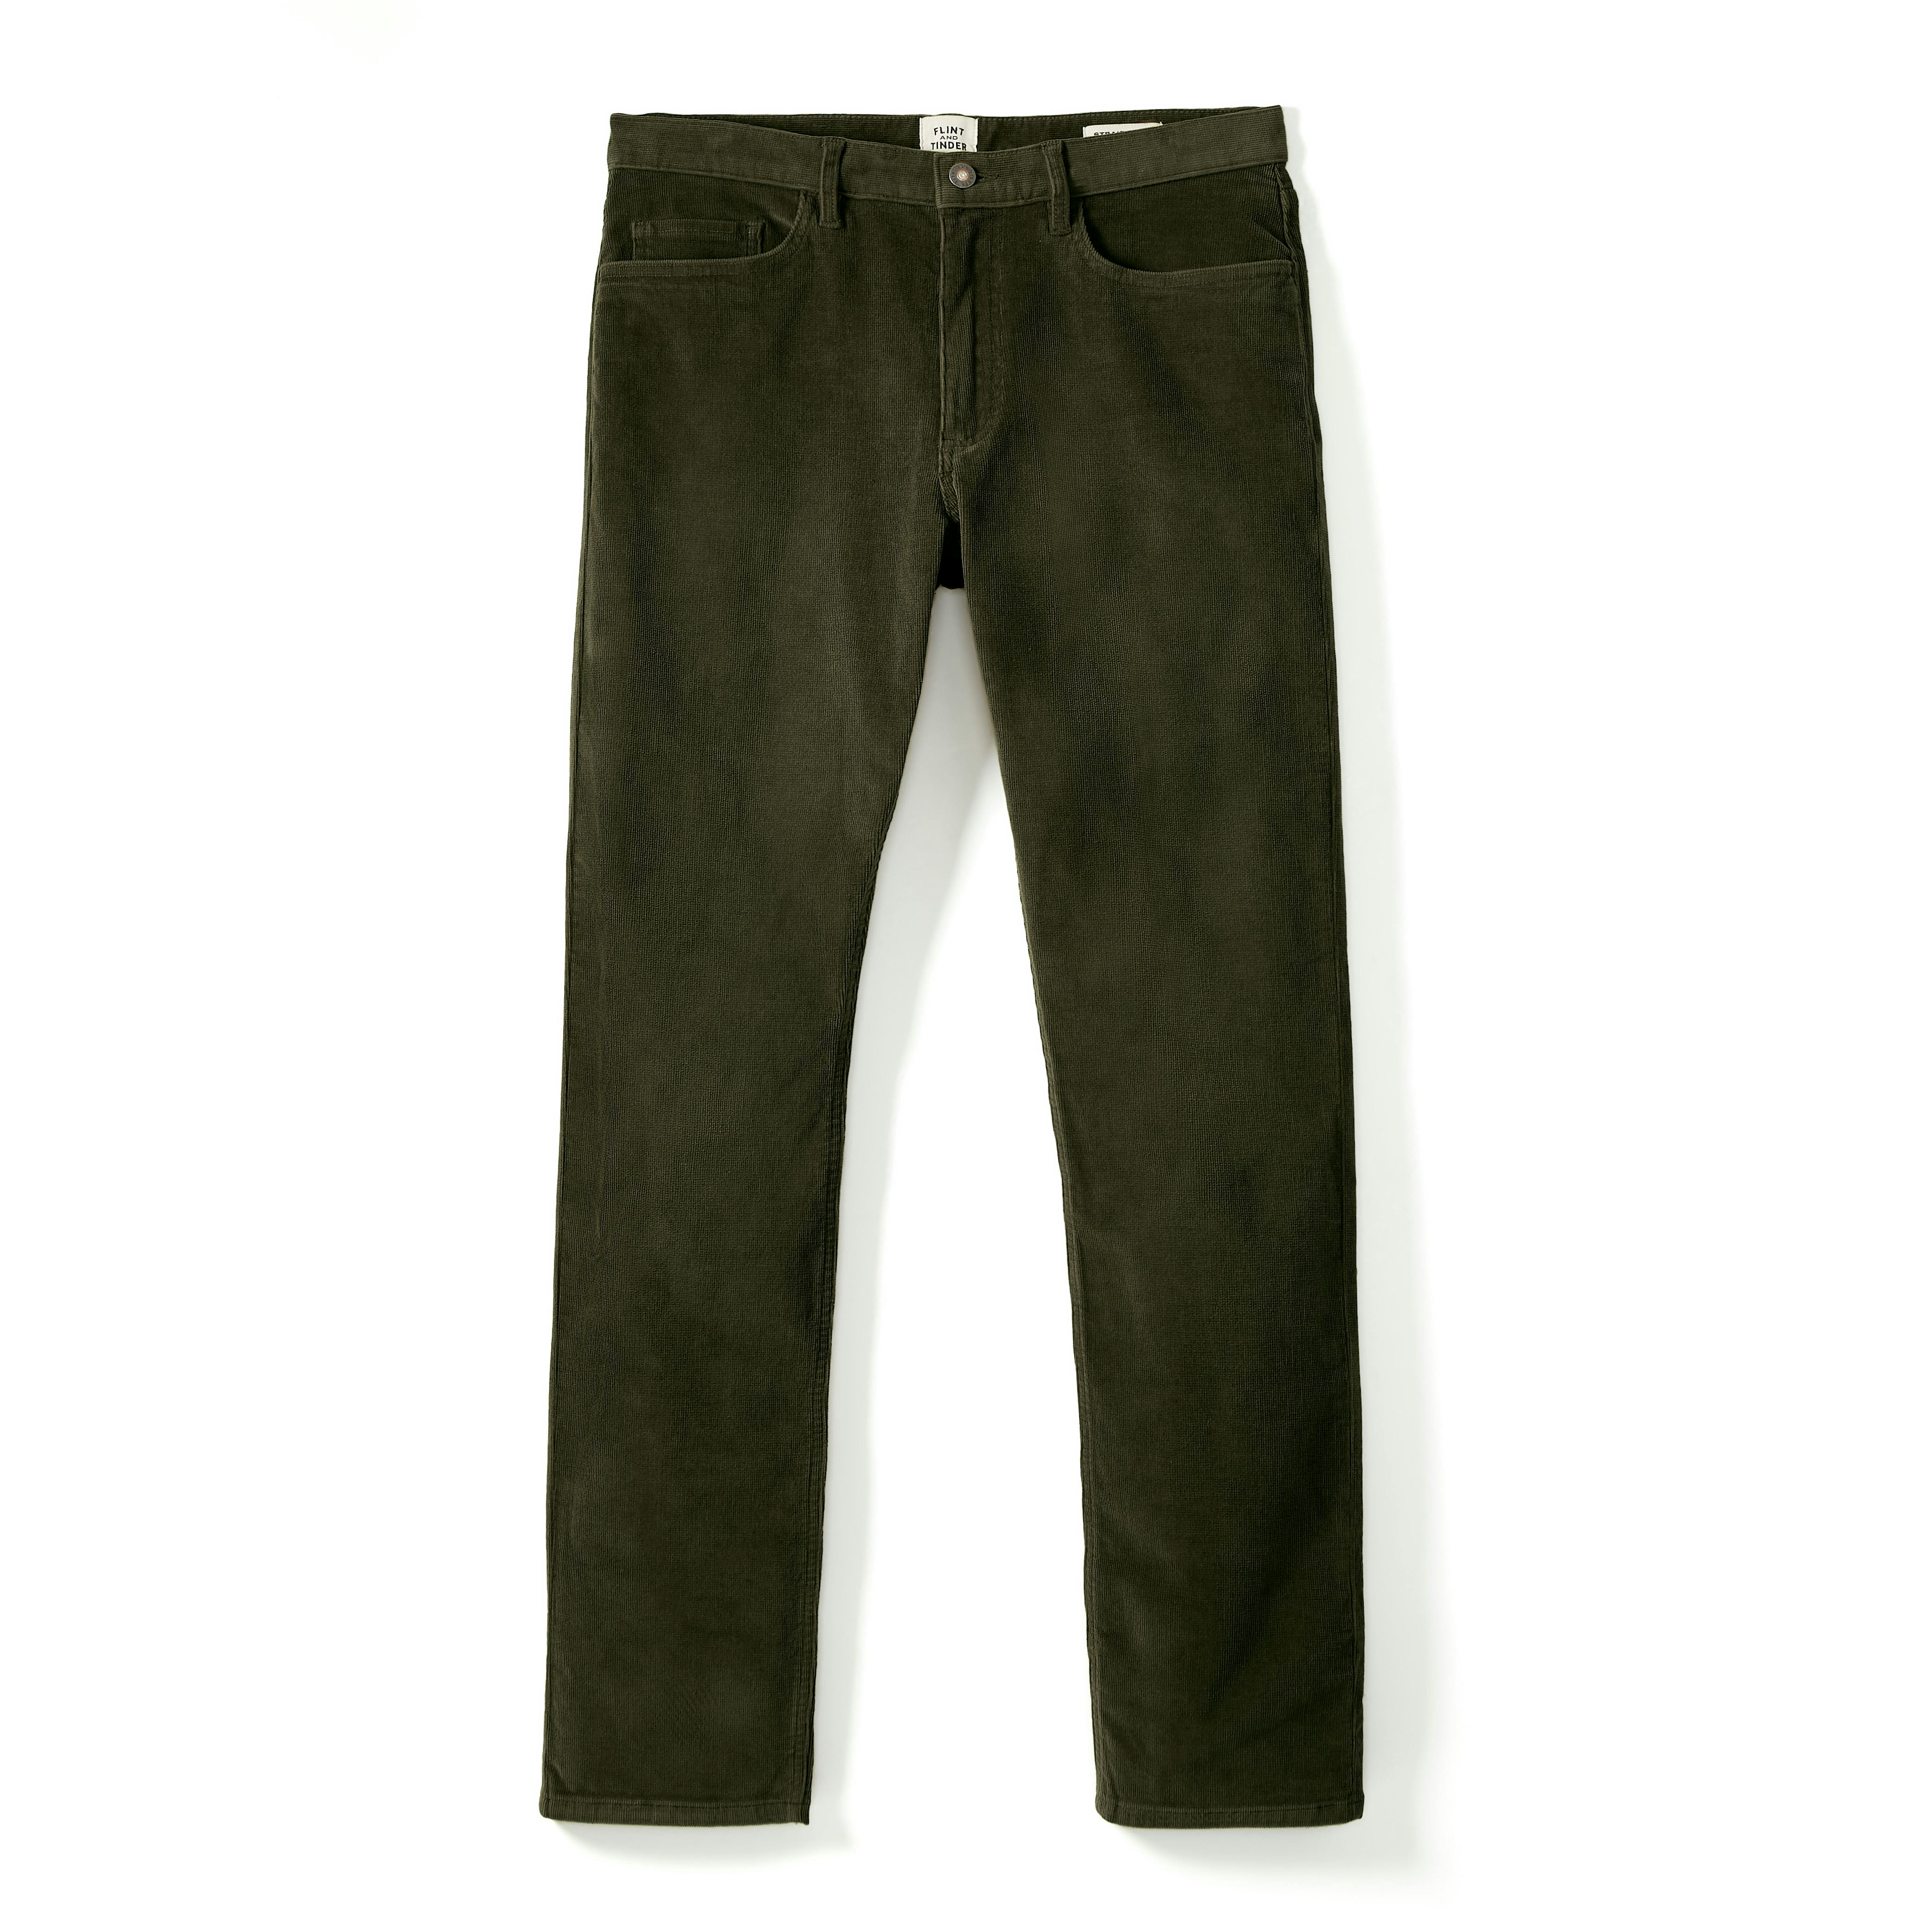 365 Corduroy Pant - Tapered